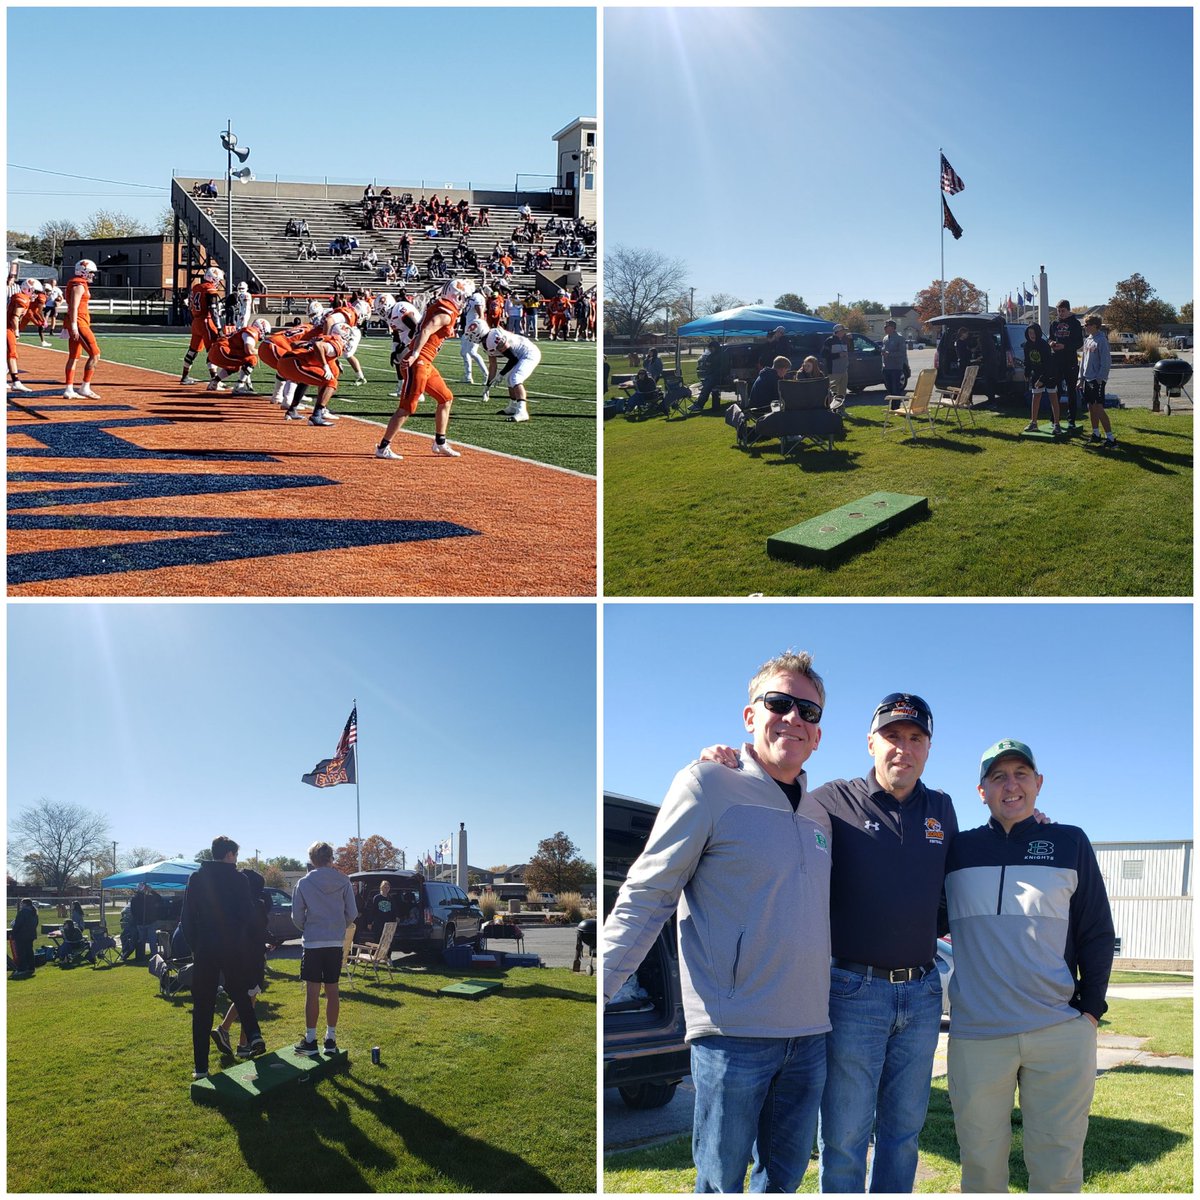 It was a beautiful day to enjoy #NAIAFootball in Fremont! Tailgating with family and friends and topped off with a @DoaneFootball win!! @CPrauner @anna_prauner @RBojanski @Berganbball #Merrillwillring